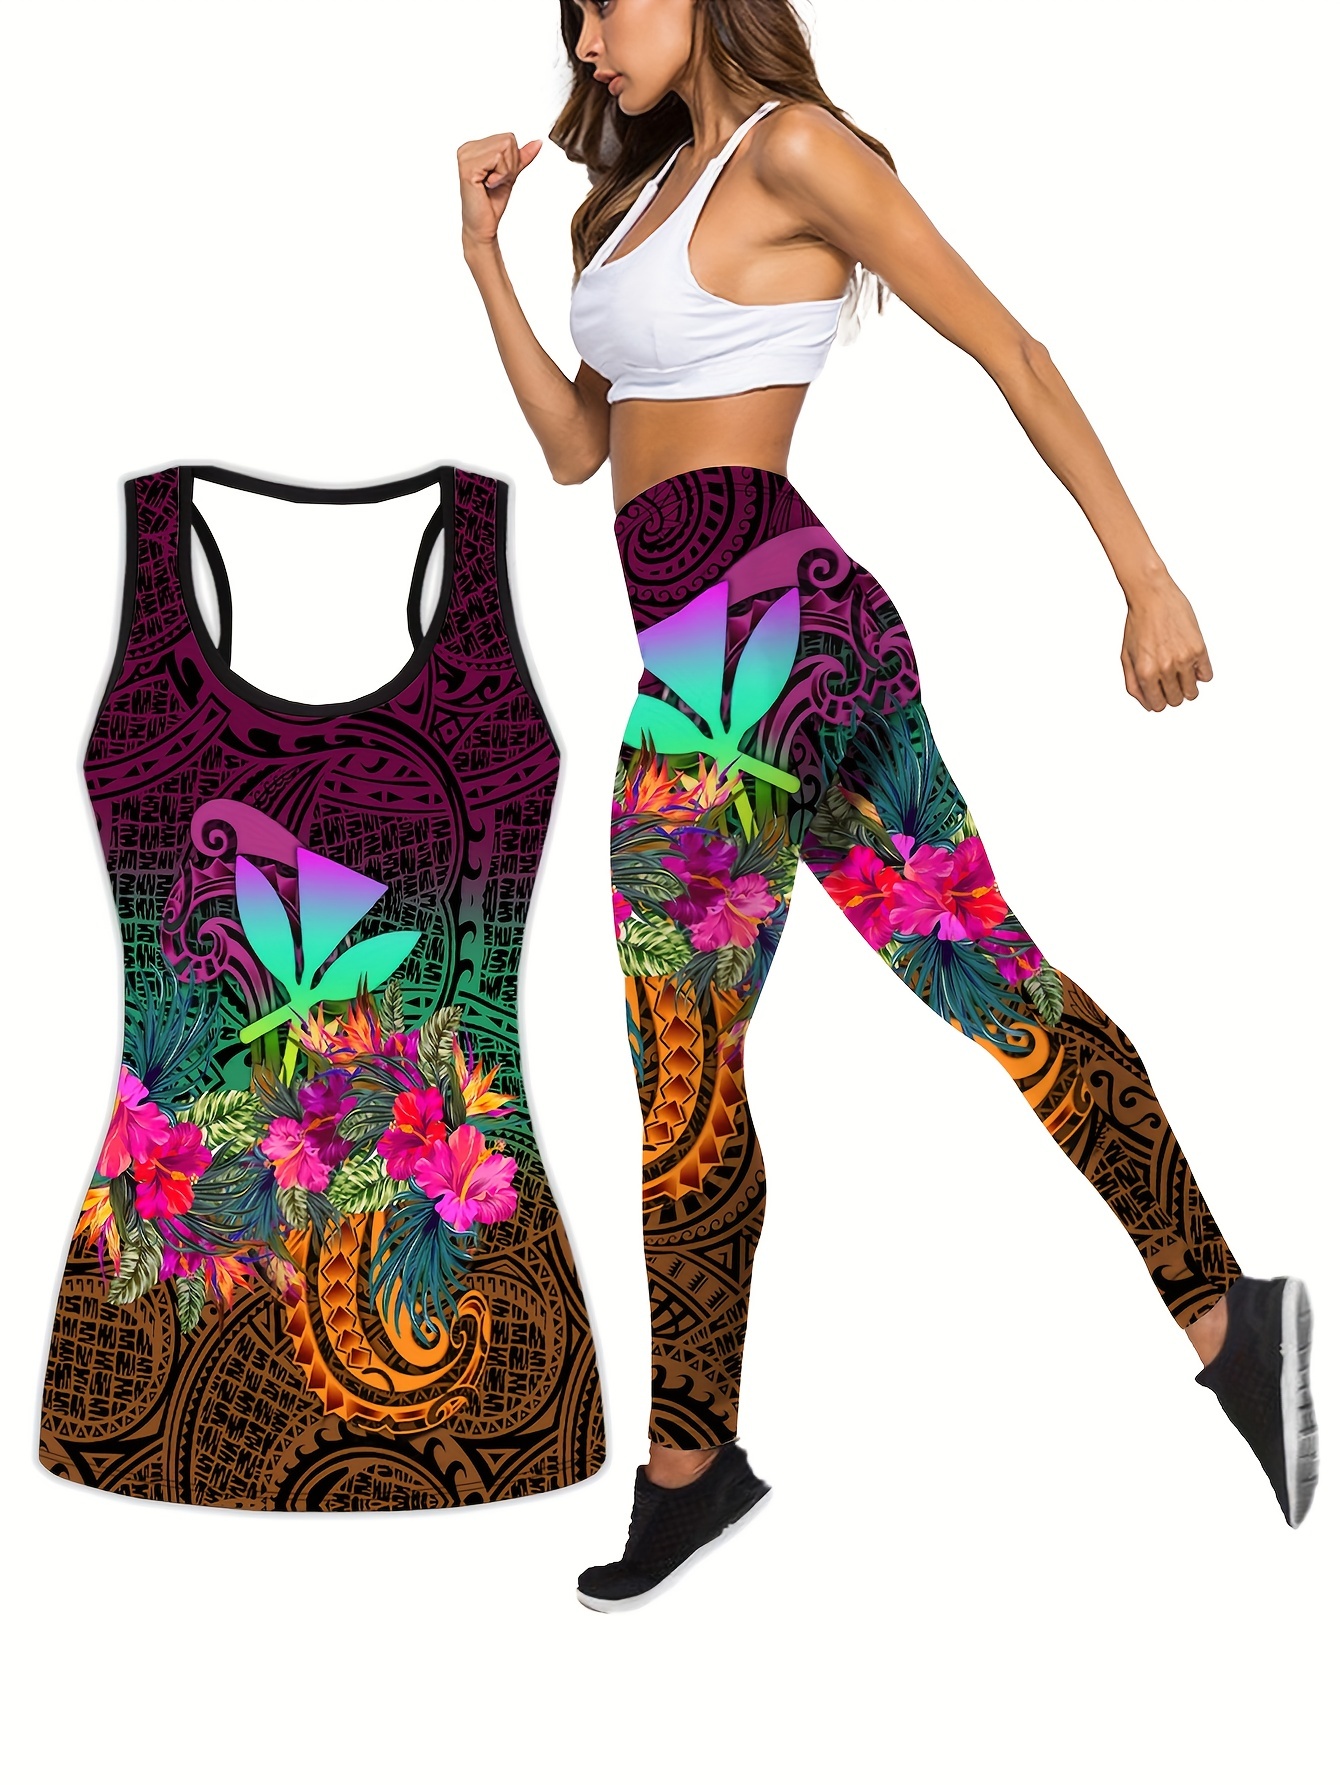 Flower Print Bright Colors Women's Workout Tank Tops, Open Back Yoga Tops  for Sports Running at  Women's Clothing store